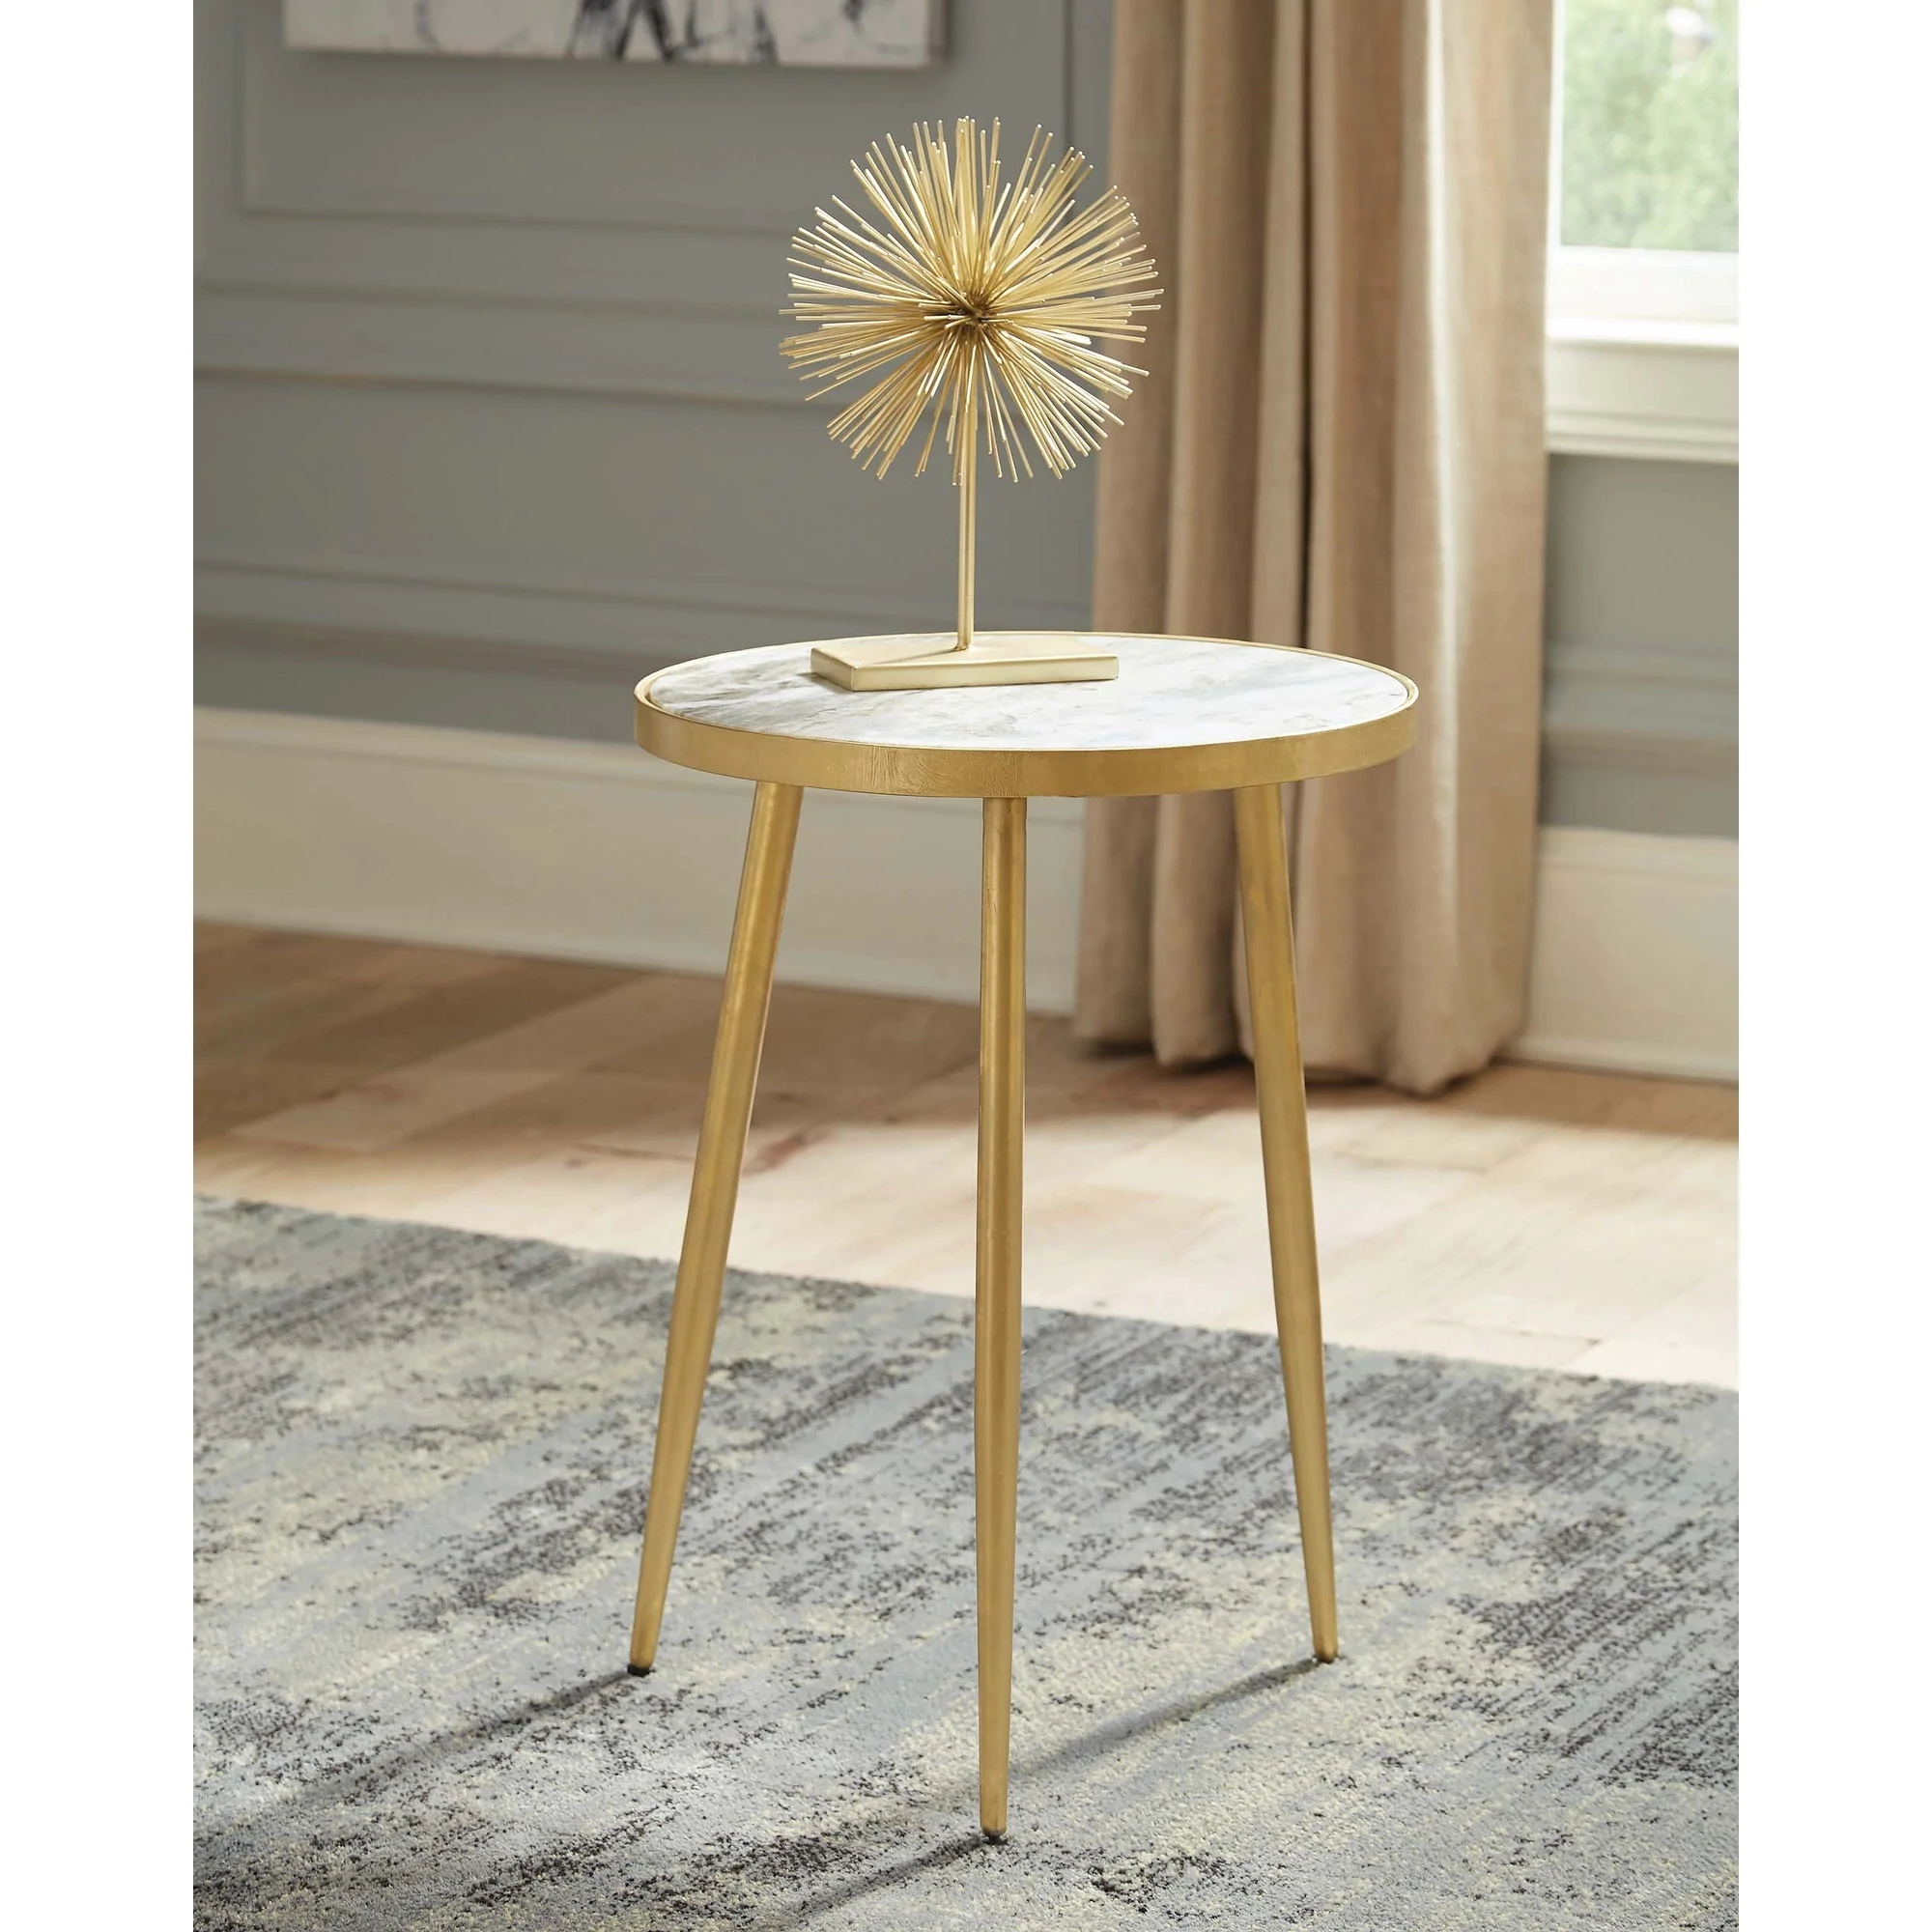 white and gold round accent table free shipping signy drum today small blue side whole patio furniture bistro with umbrella hole saddle stool wesley cabinets dining room accents